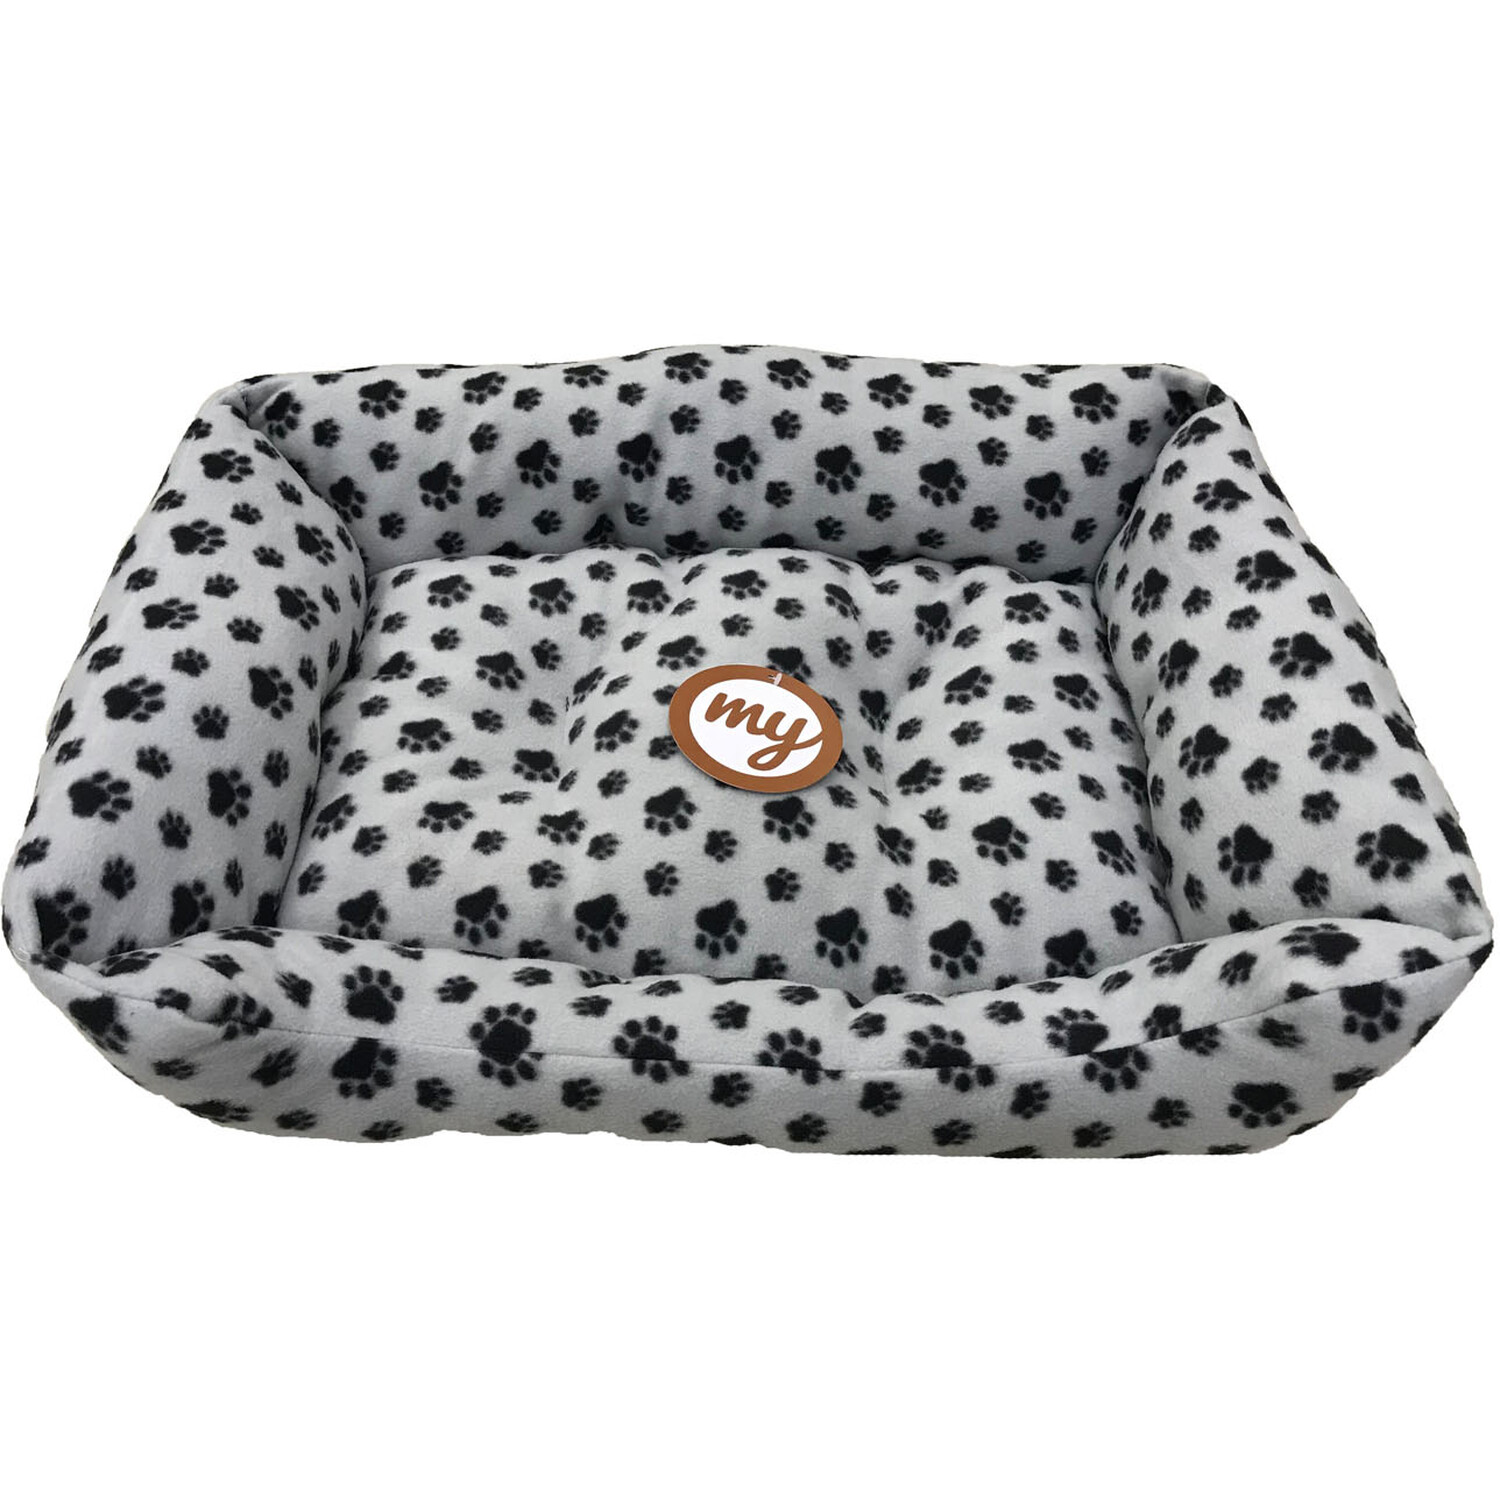 Single My Fleece Soft Dog Bed in Assorted styles Image 3